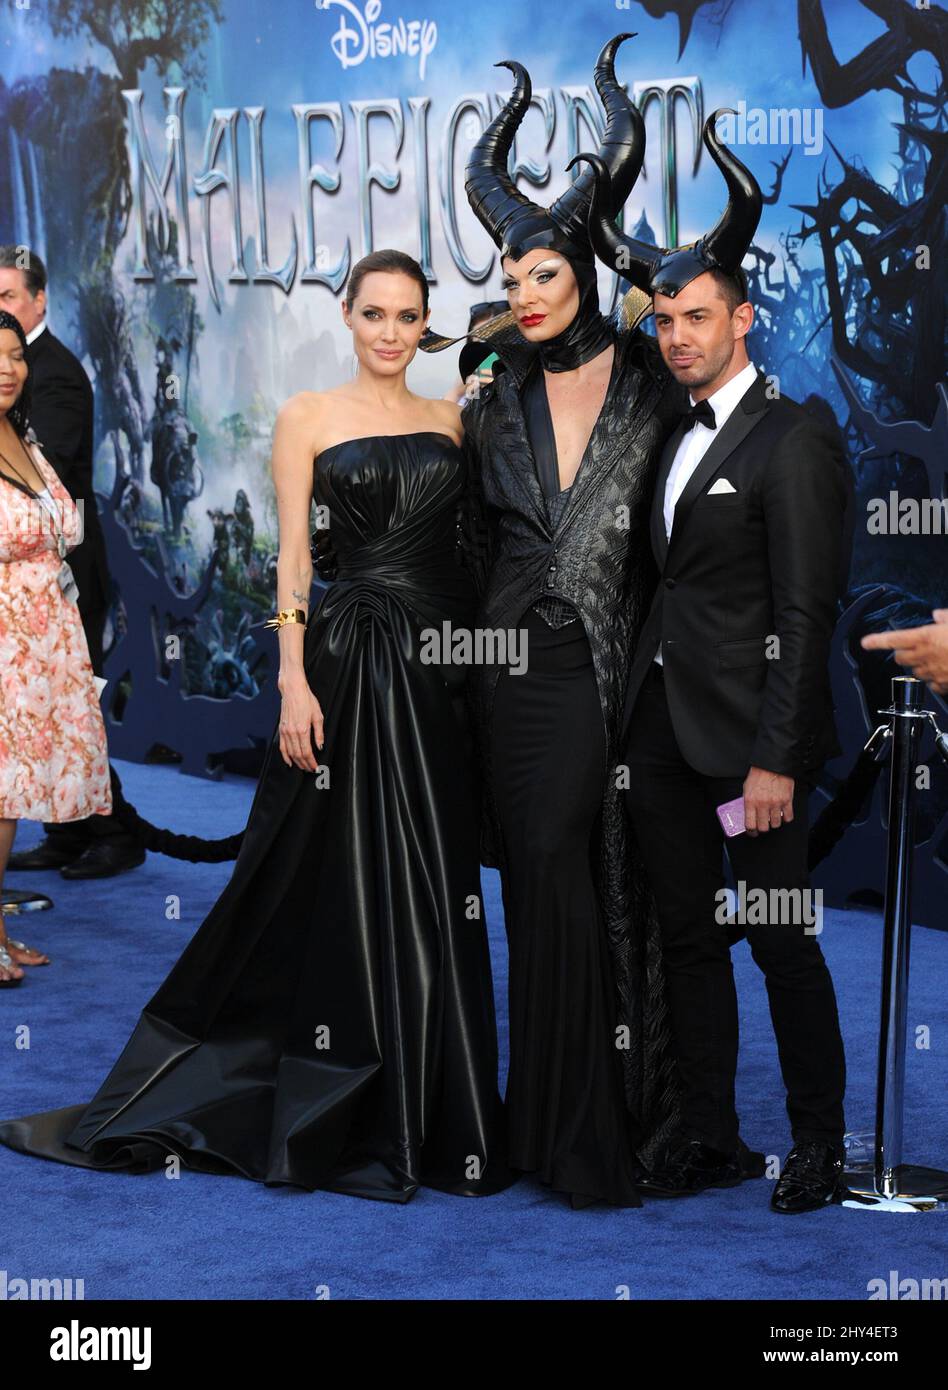 Angelina Jolie attending the premiere of 'Maleficent' in Los Angeles, California. Stock Photo